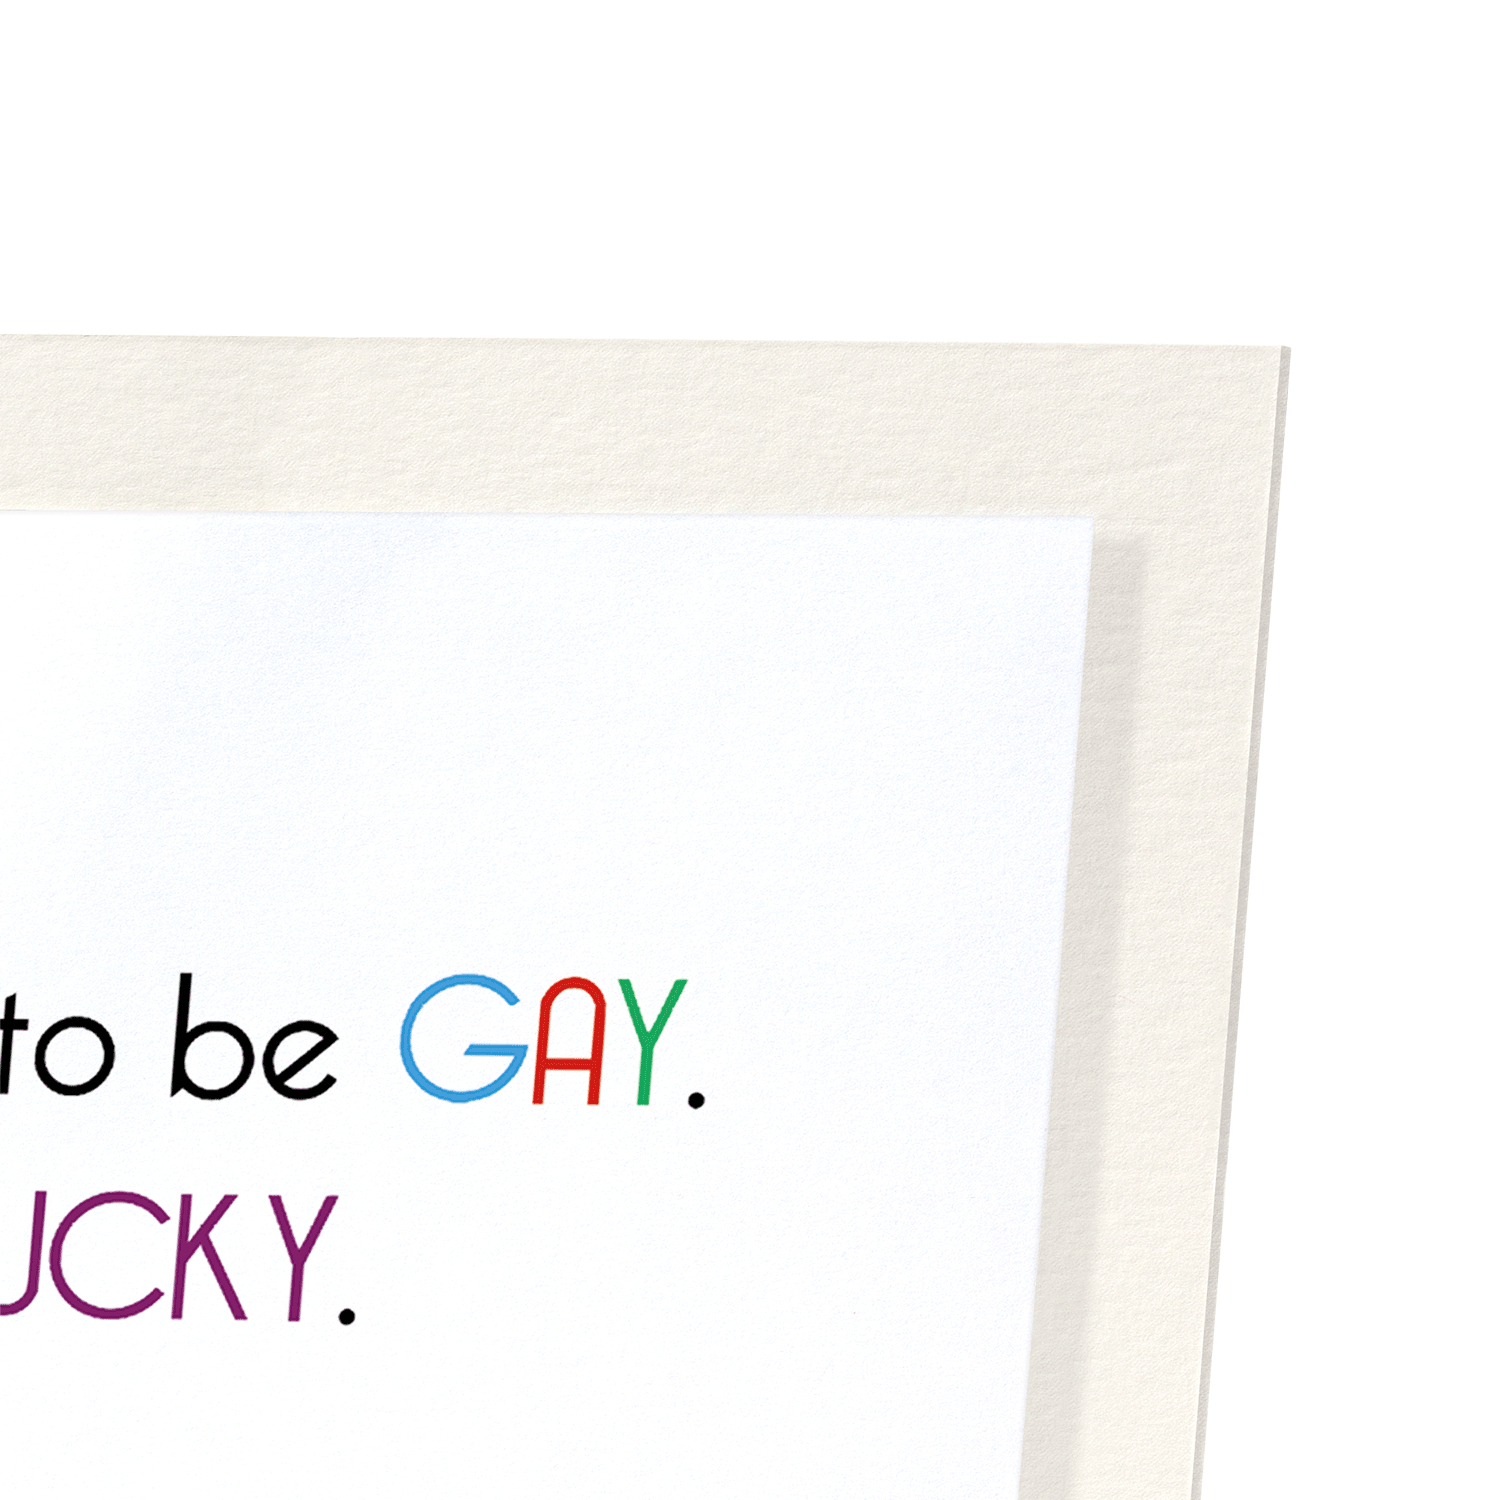 LUCKY AND GAY